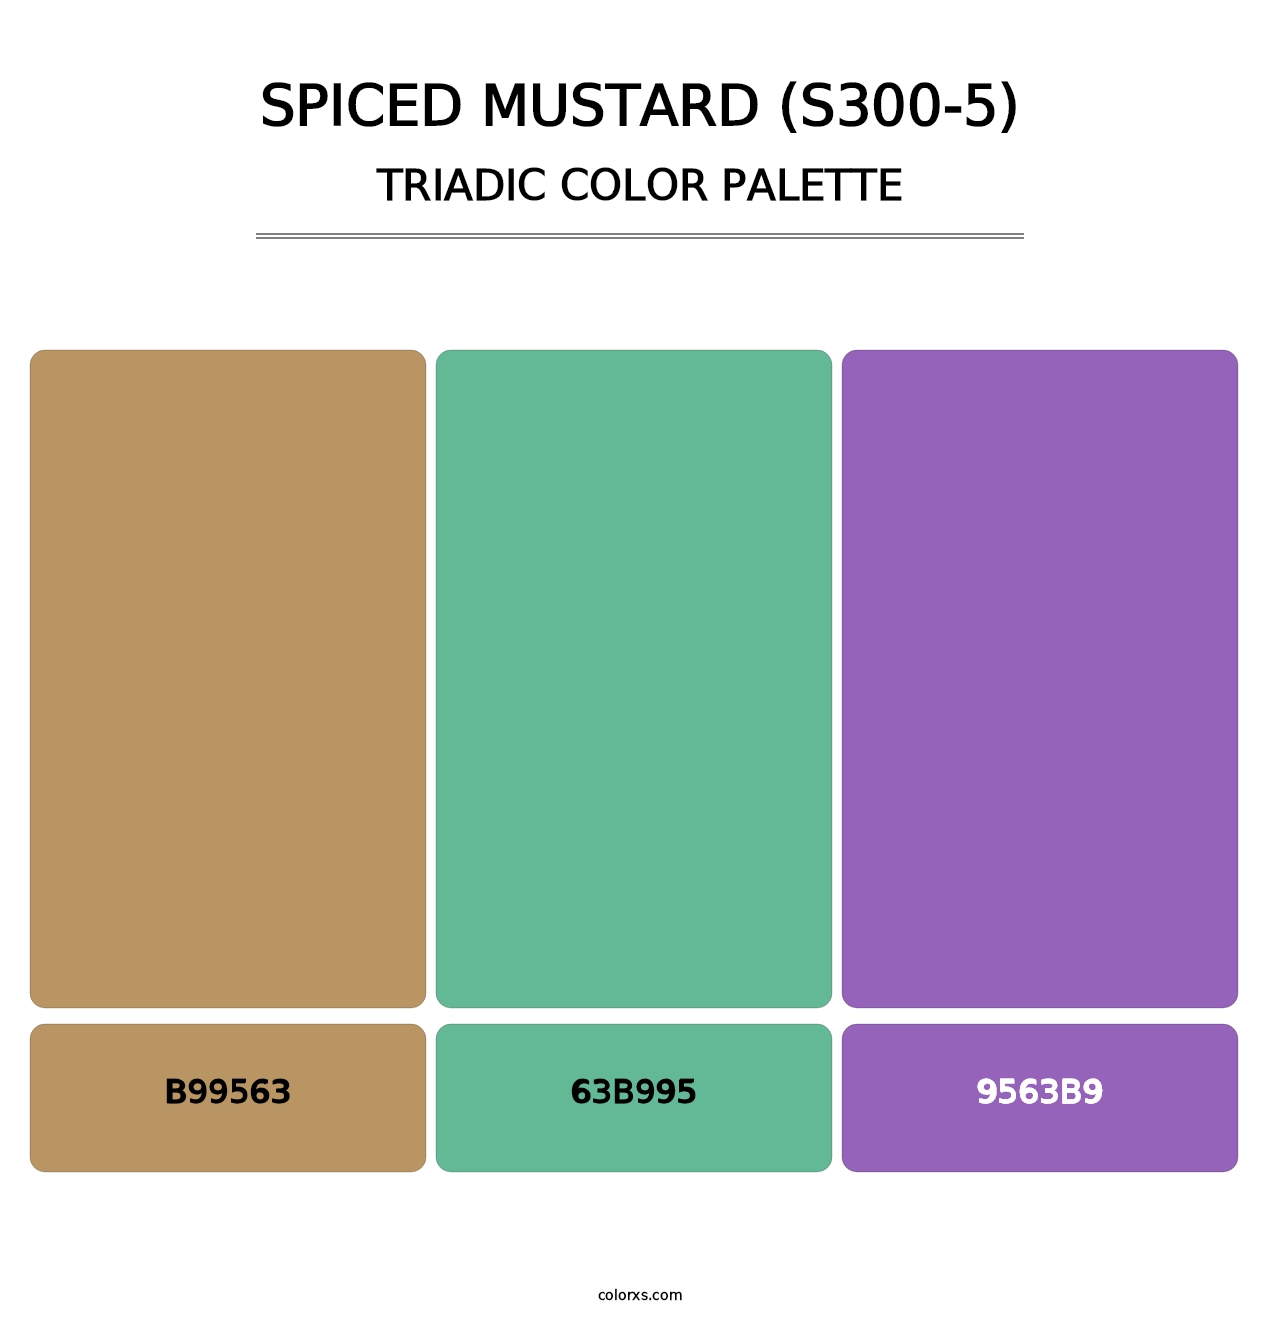 Spiced Mustard (S300-5) - Triadic Color Palette